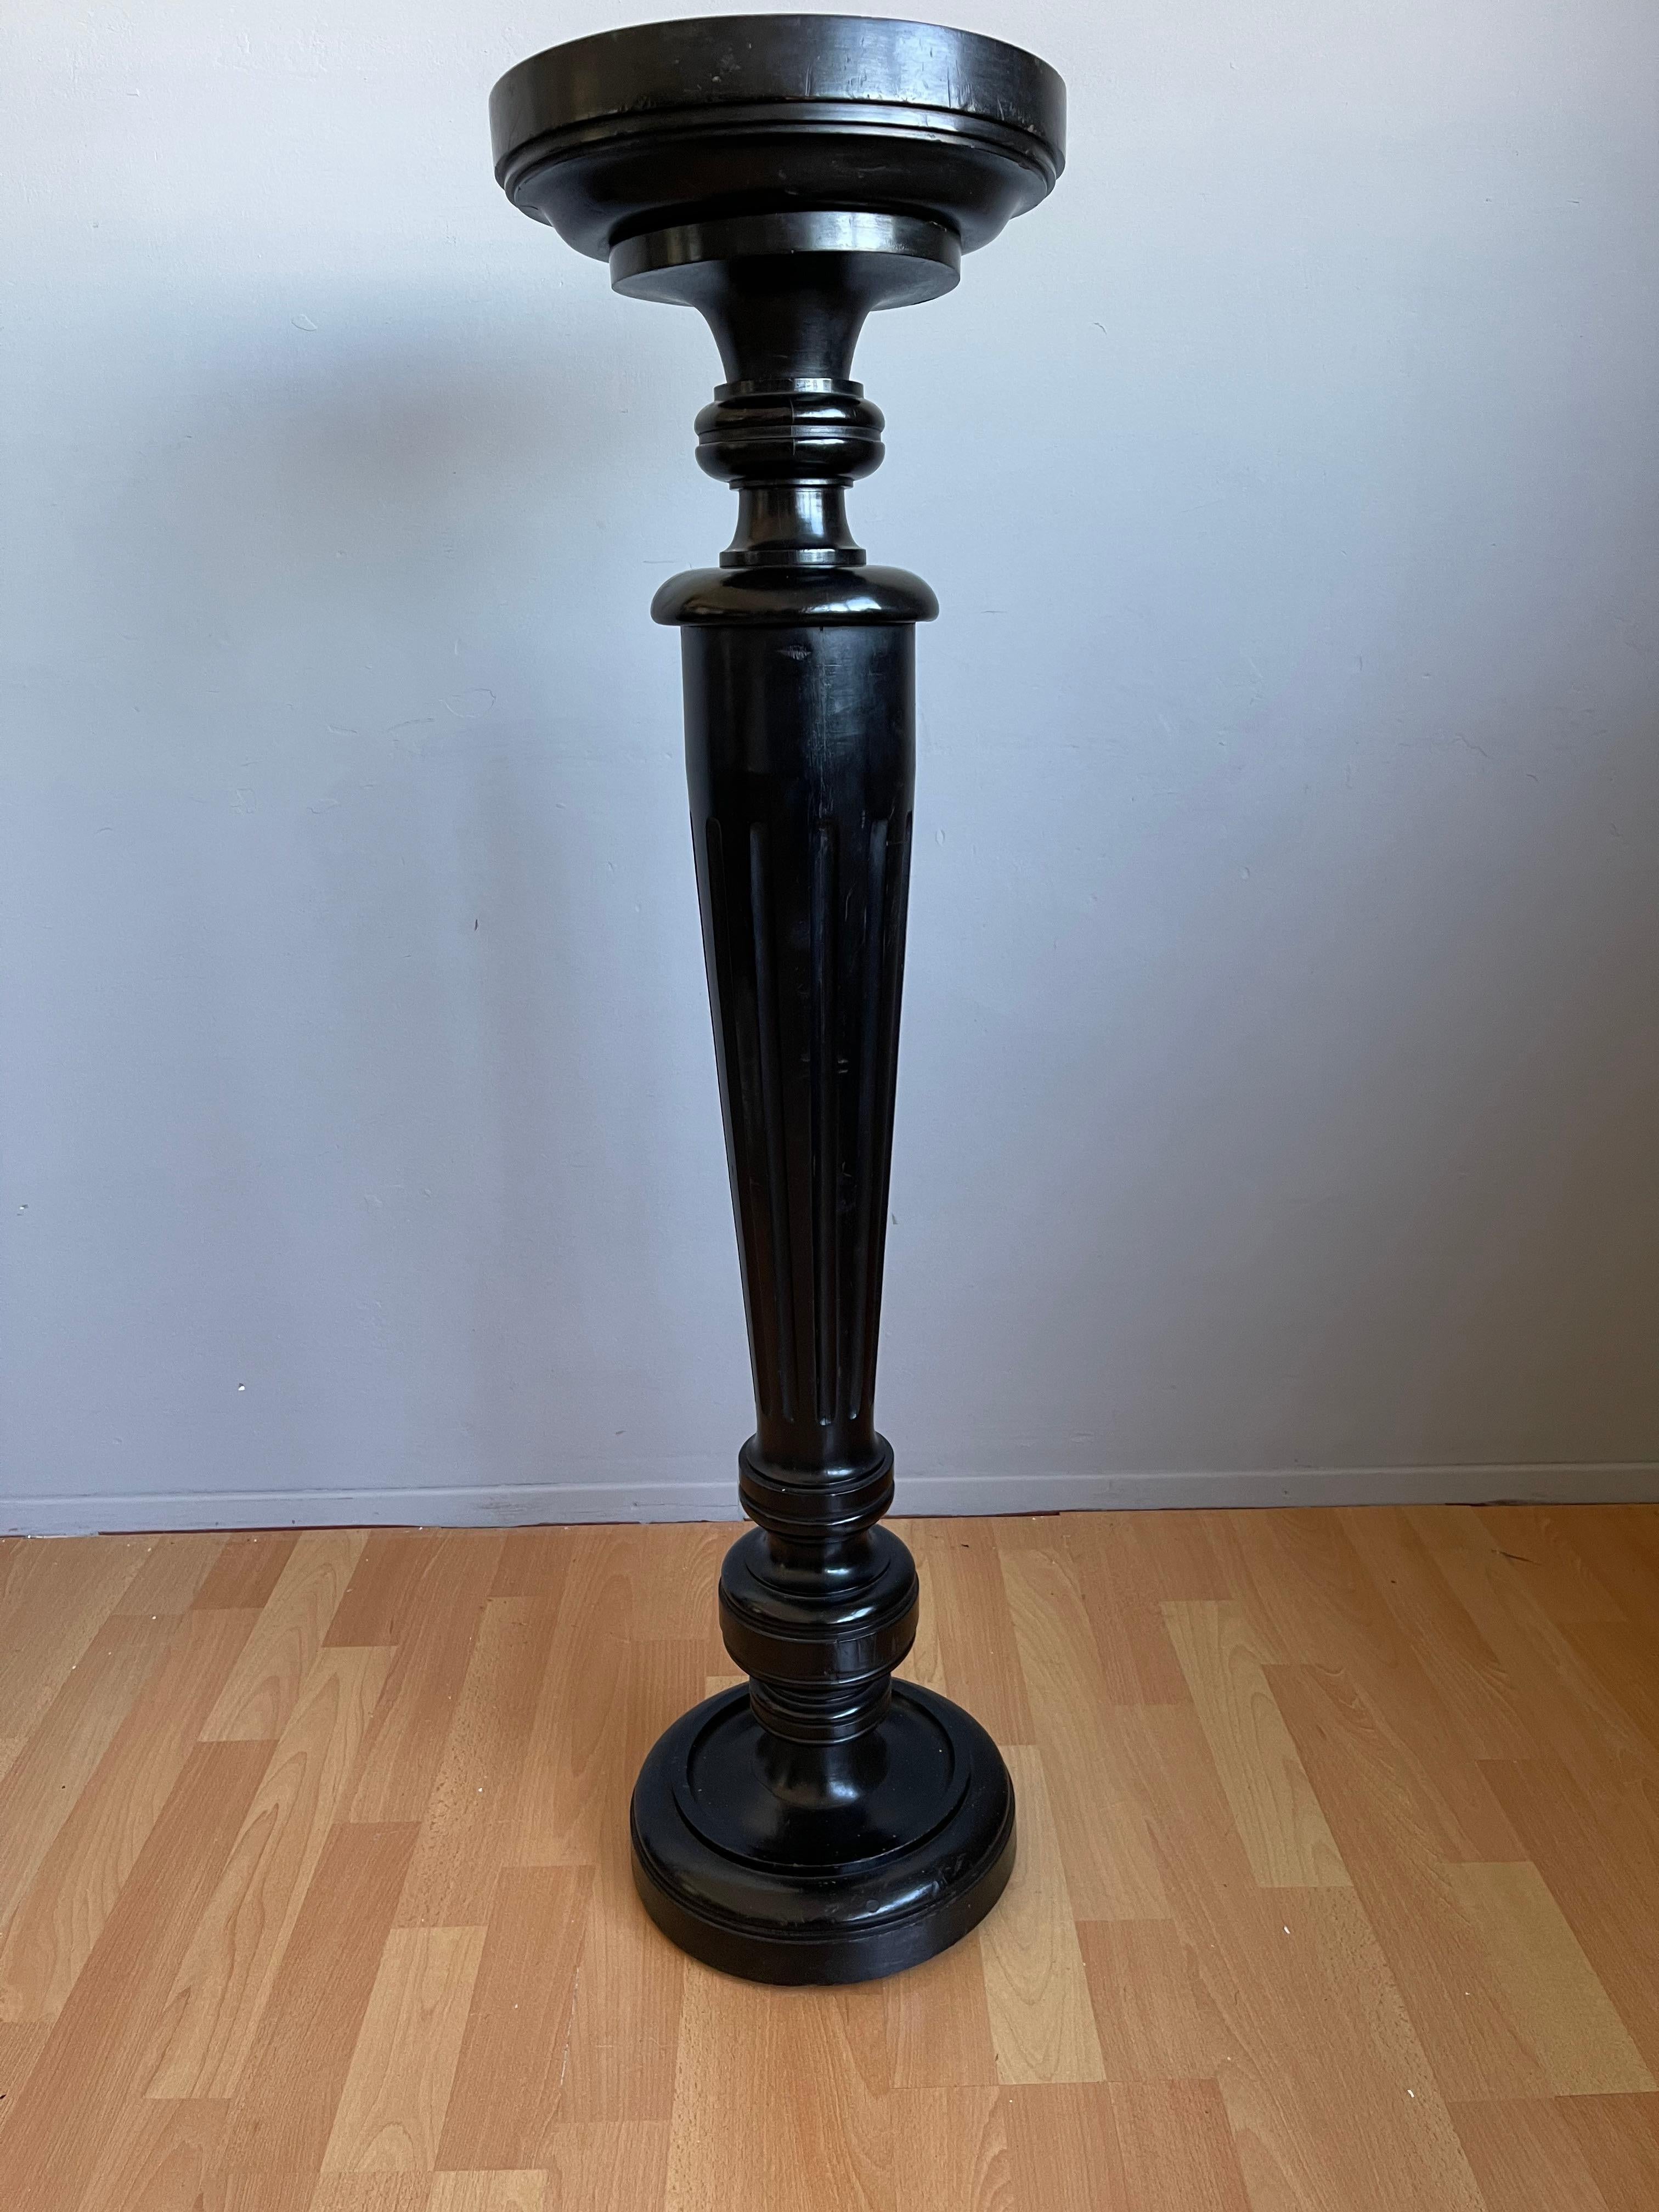 Wonderful column for displaying a work of art or otherwise.

This antique and classical design pedestal is perfect for showcasing an antique sculpture, vase or bust. Most colors will contrast beautifully against the fully ebonized, black surface